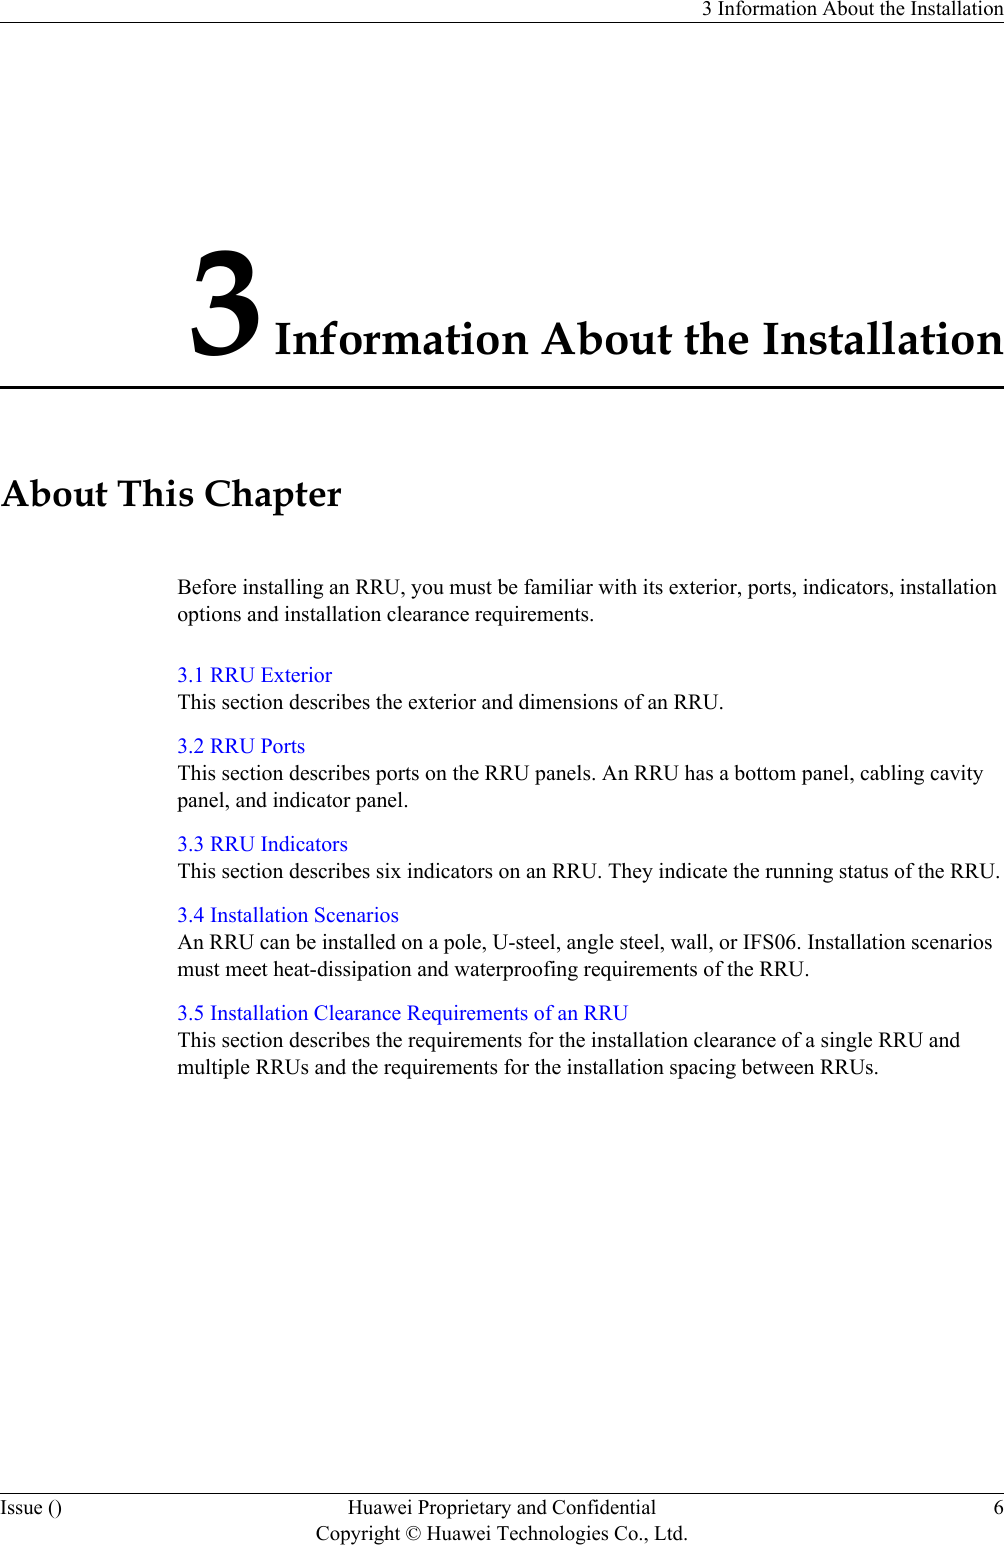 3 Information About the InstallationAbout This ChapterBefore installing an RRU, you must be familiar with its exterior, ports, indicators, installationoptions and installation clearance requirements.3.1 RRU ExteriorThis section describes the exterior and dimensions of an RRU.3.2 RRU PortsThis section describes ports on the RRU panels. An RRU has a bottom panel, cabling cavitypanel, and indicator panel.3.3 RRU IndicatorsThis section describes six indicators on an RRU. They indicate the running status of the RRU.3.4 Installation ScenariosAn RRU can be installed on a pole, U-steel, angle steel, wall, or IFS06. Installation scenariosmust meet heat-dissipation and waterproofing requirements of the RRU.3.5 Installation Clearance Requirements of an RRUThis section describes the requirements for the installation clearance of a single RRU andmultiple RRUs and the requirements for the installation spacing between RRUs.3 Information About the InstallationIssue () Huawei Proprietary and ConfidentialCopyright © Huawei Technologies Co., Ltd.6